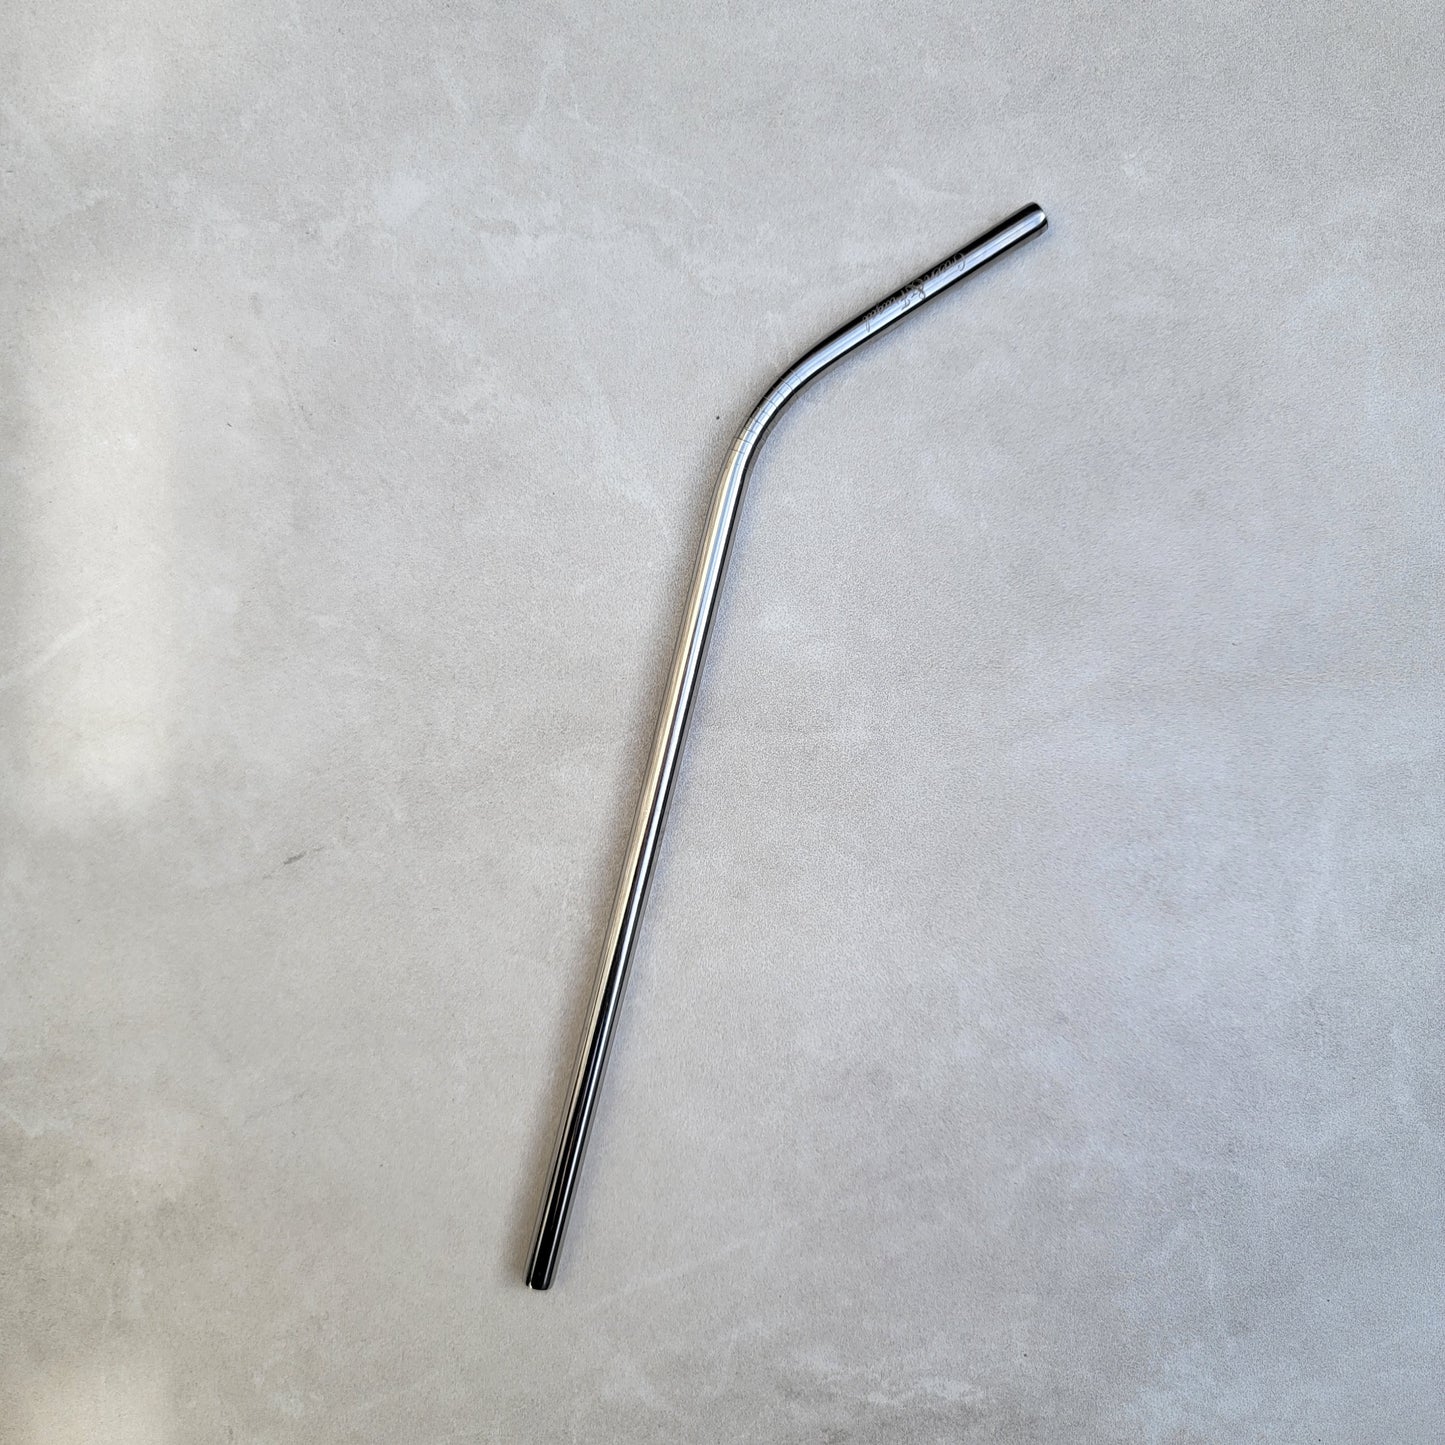 Reusable Straw - Standard size stainless